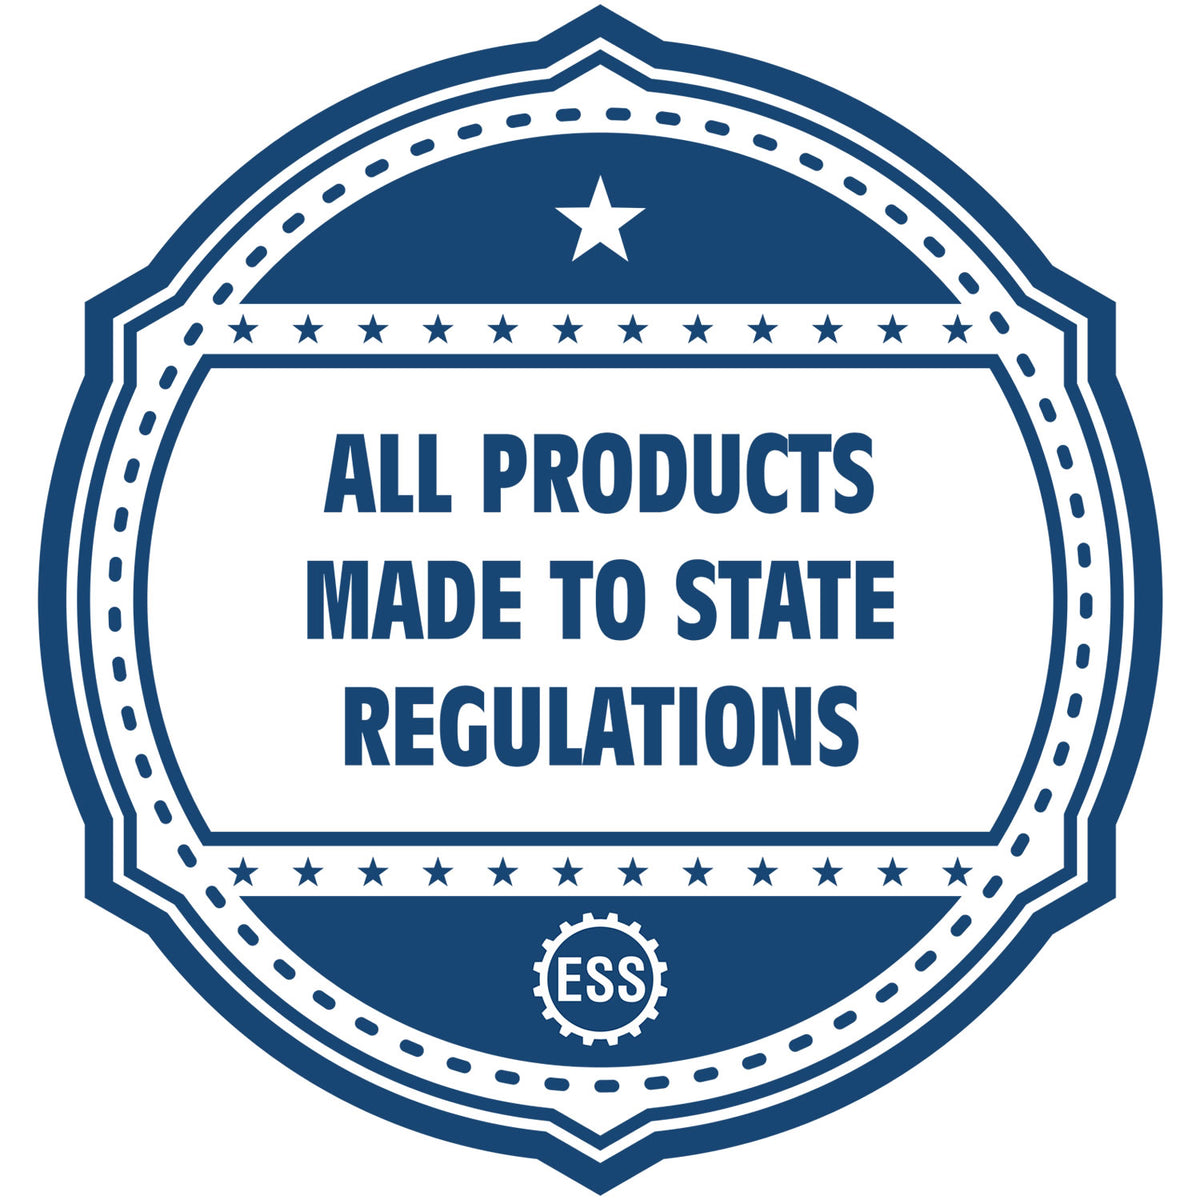 An icon or badge element for the Digital Vermont Landscape Architect Stamp showing that this product is made in compliance with state regulations.